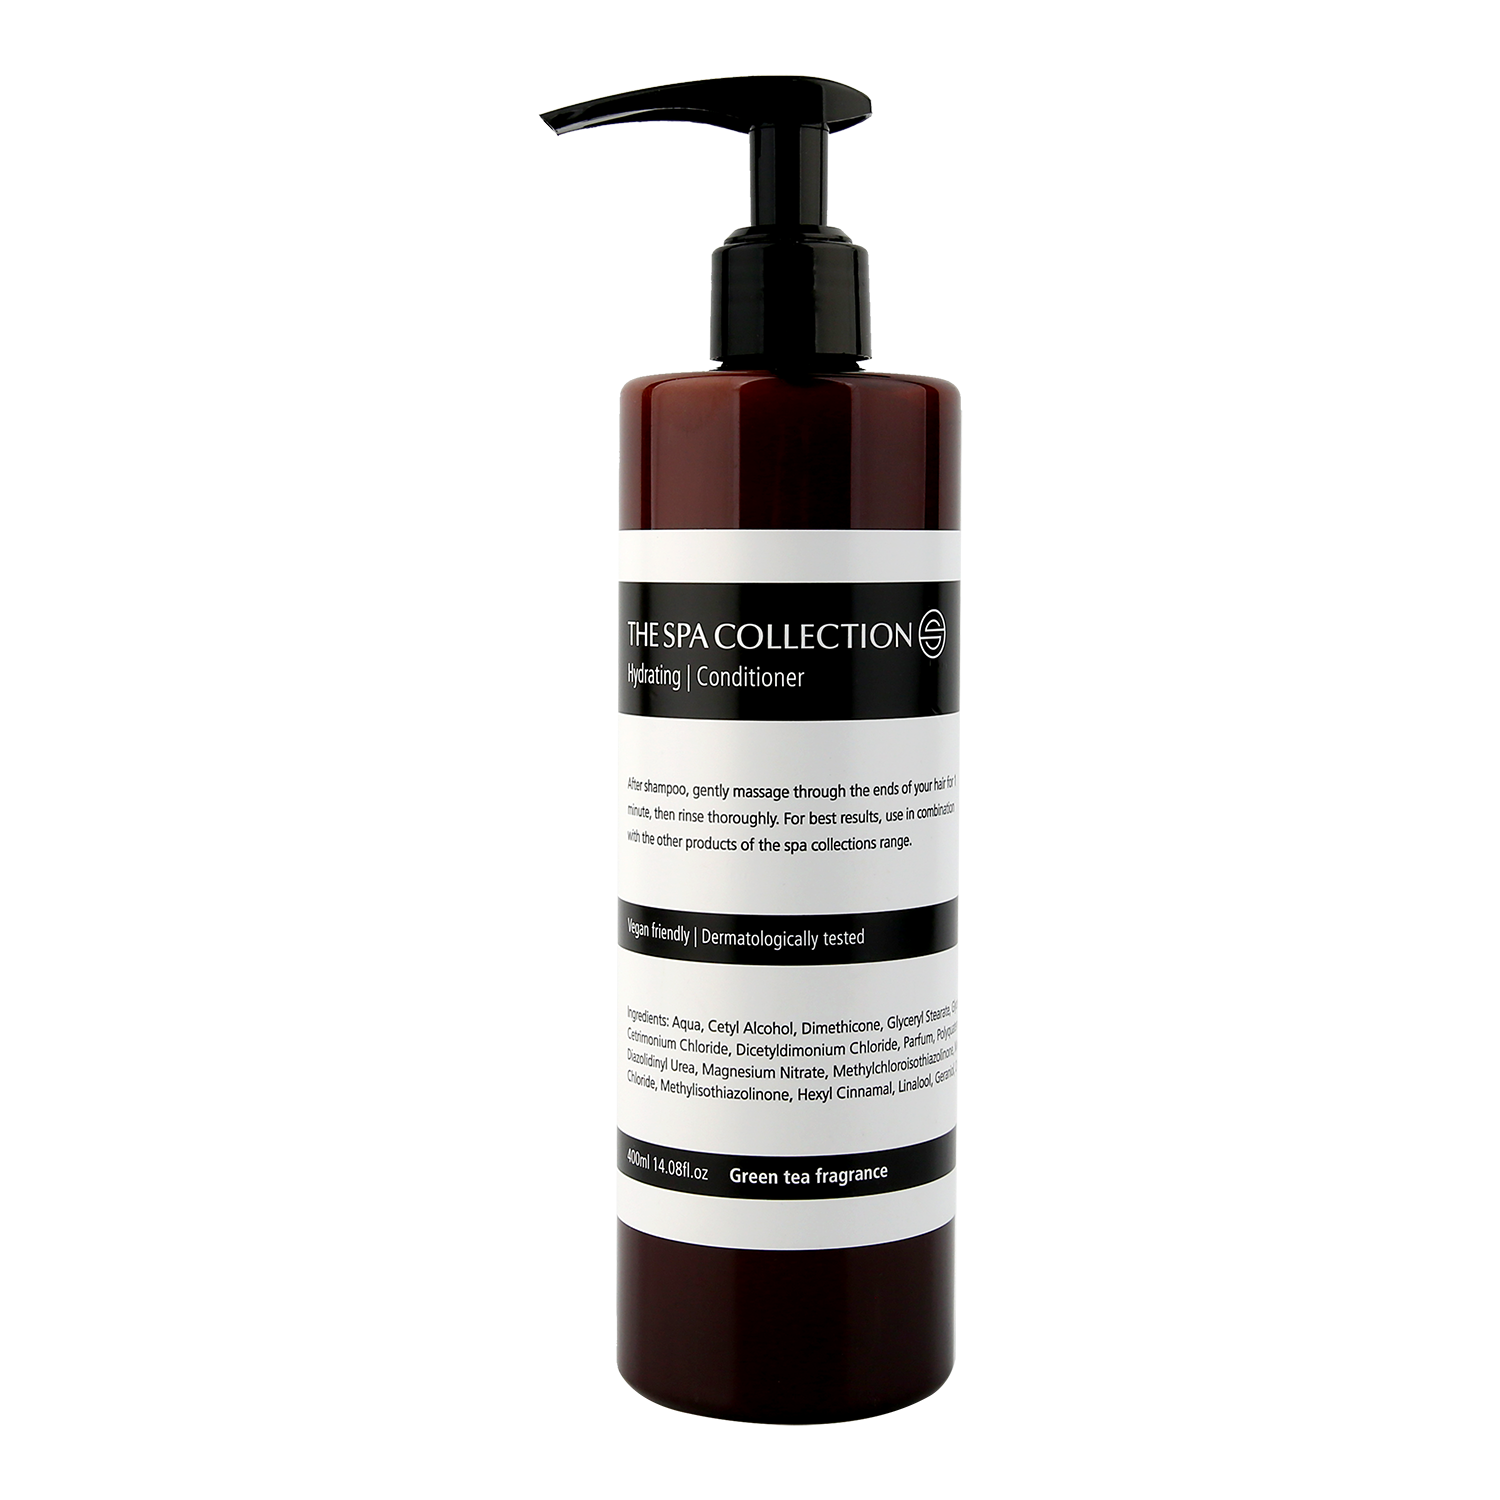 Premium conditioner with green tea fragrance by The Spa Collection in apothecary style bottle, aesthetic bathroom interior.